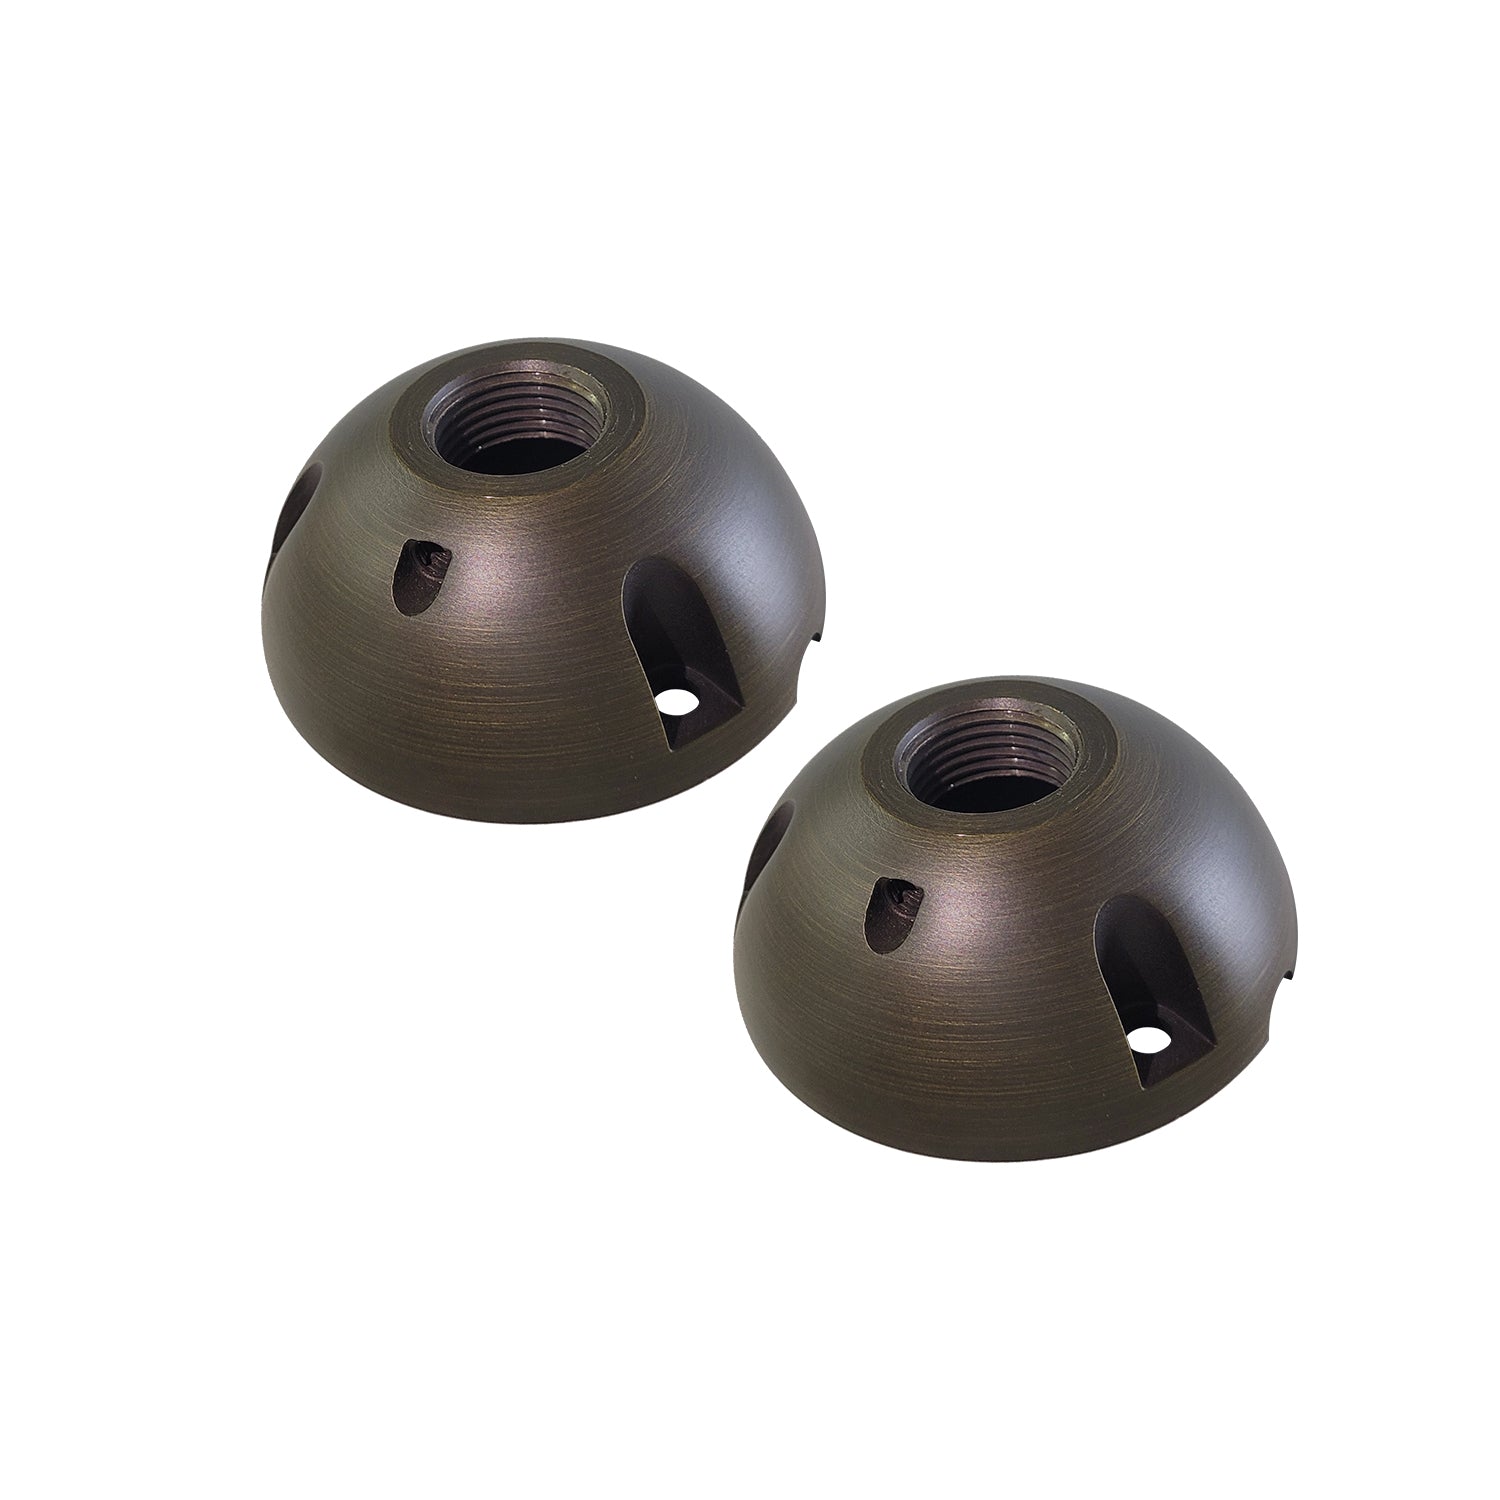 Die-cast brass landscape light mounting plates, 2.76 diameter half-round with threading for COLOER spotlights and outdoor lighting installation.